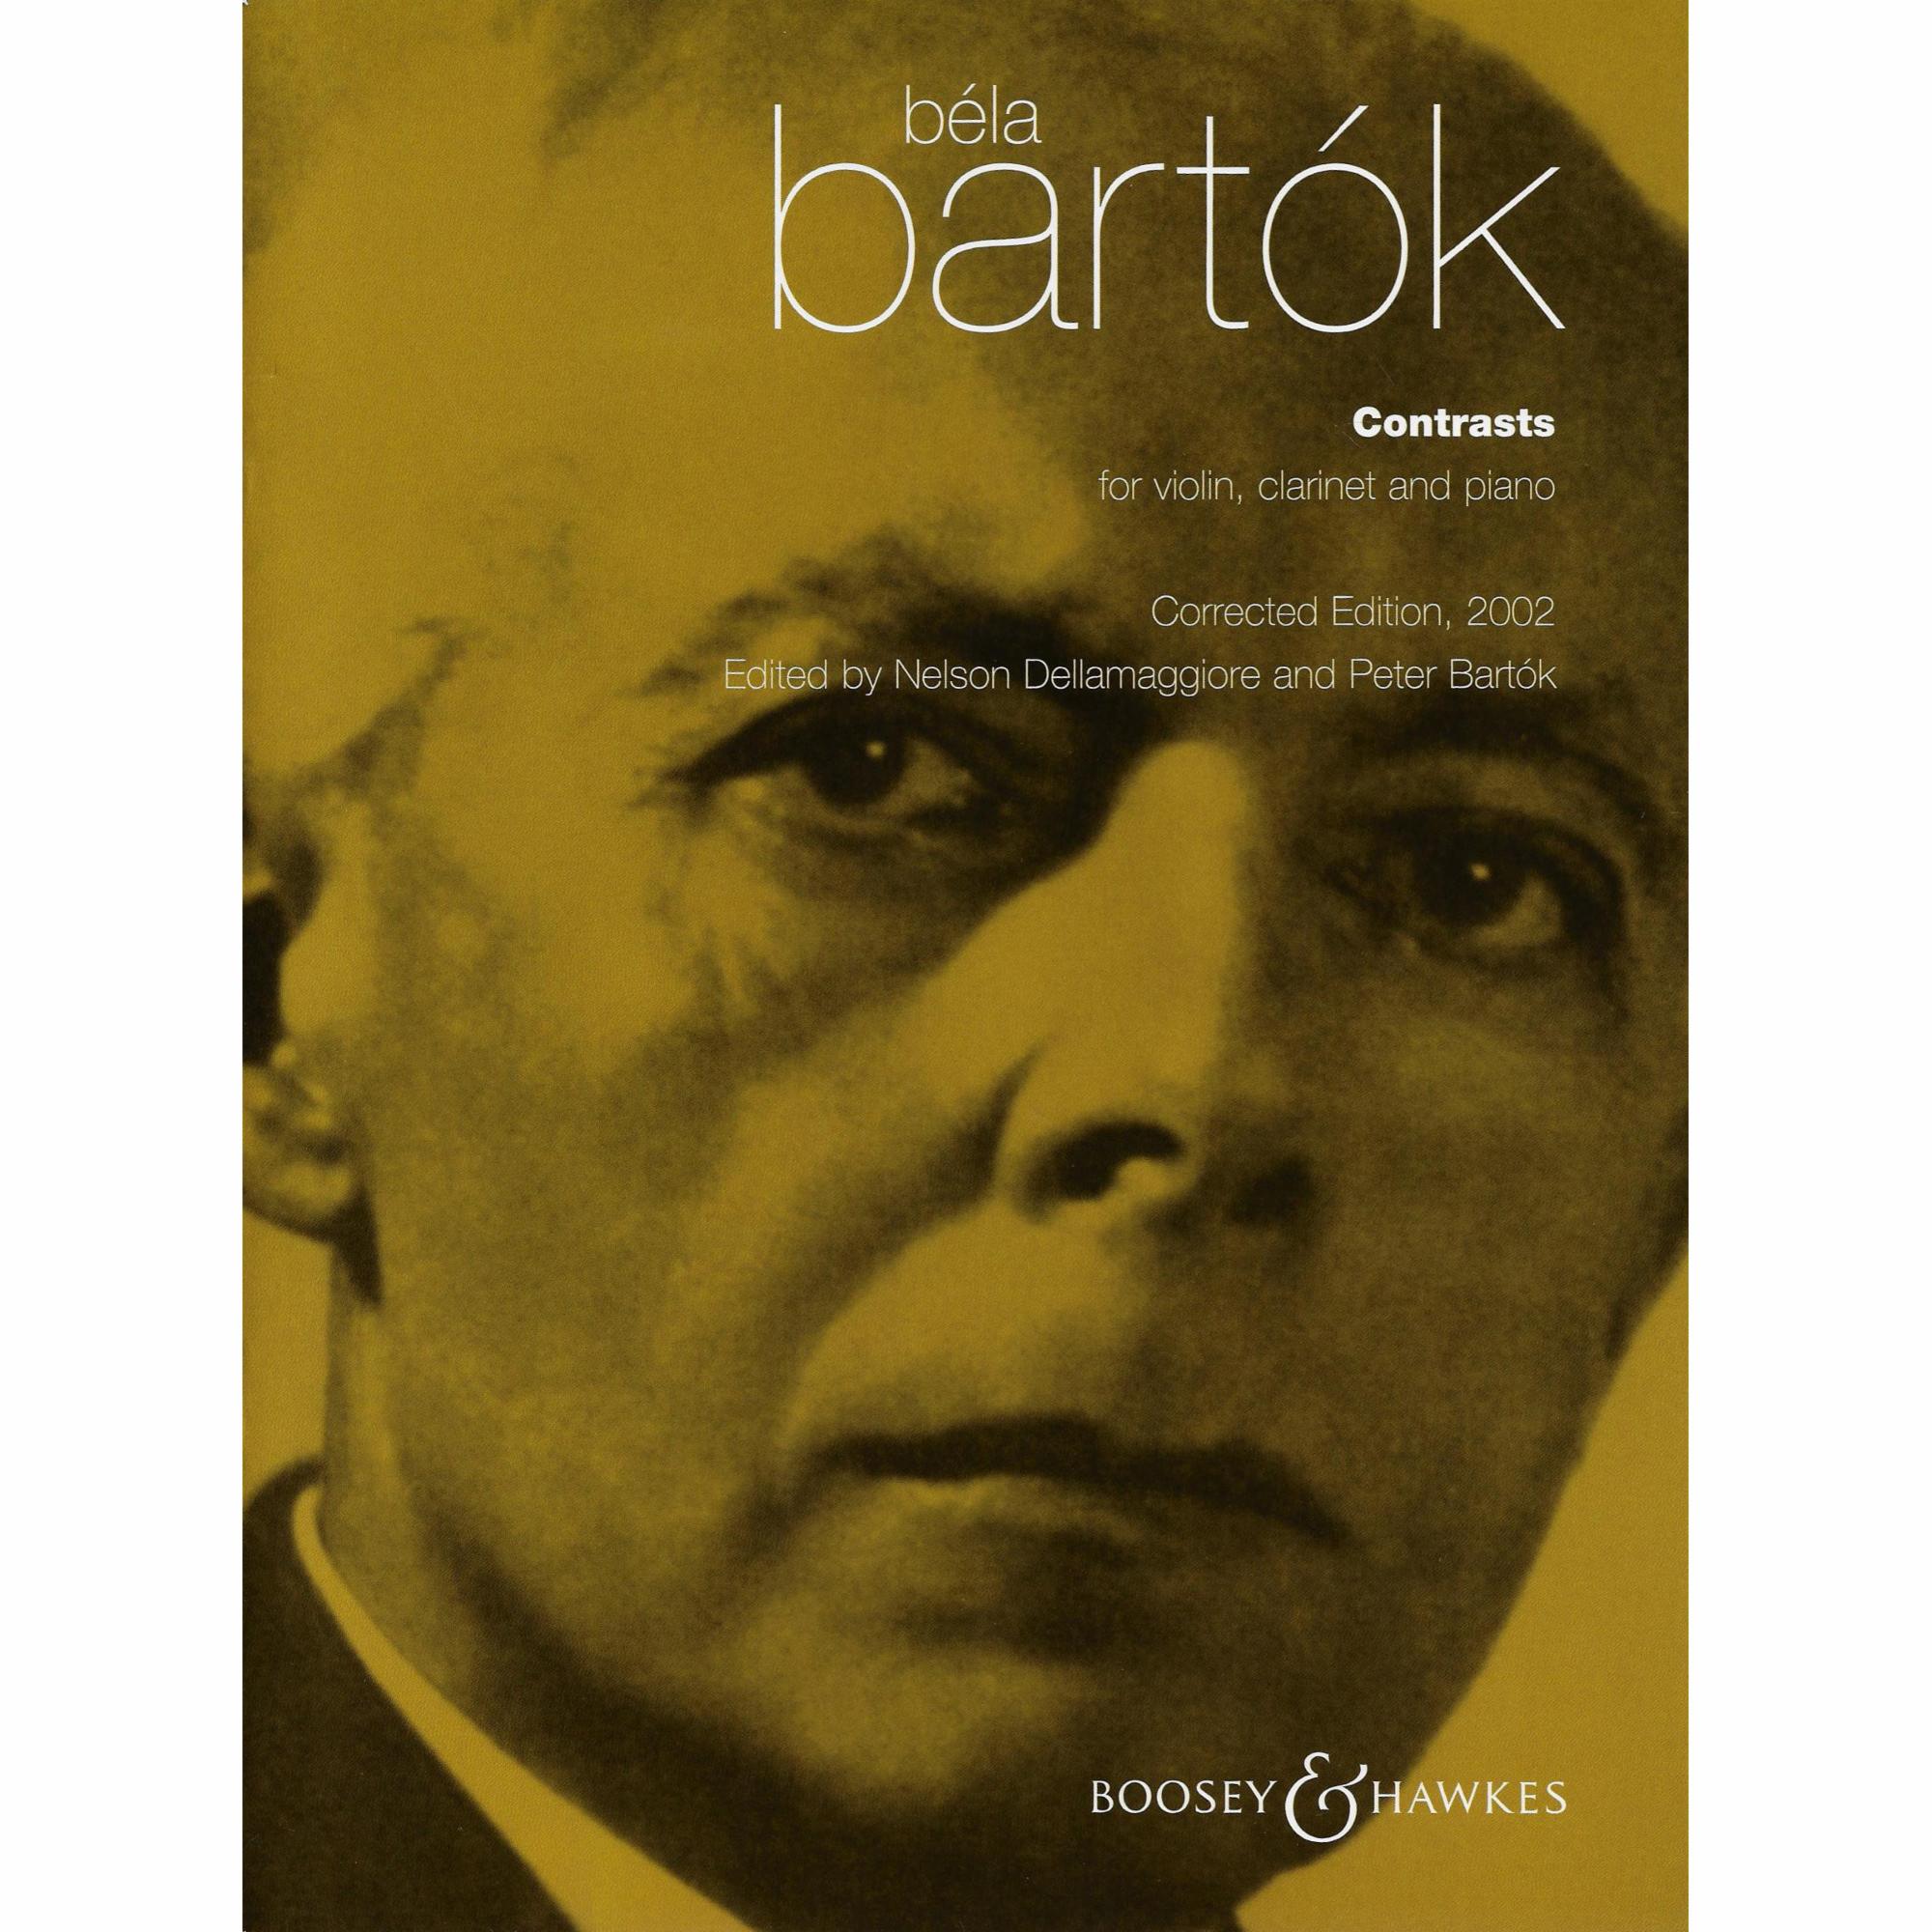 Bartok -- Contrasts for Clarinet, Violin, and Piano